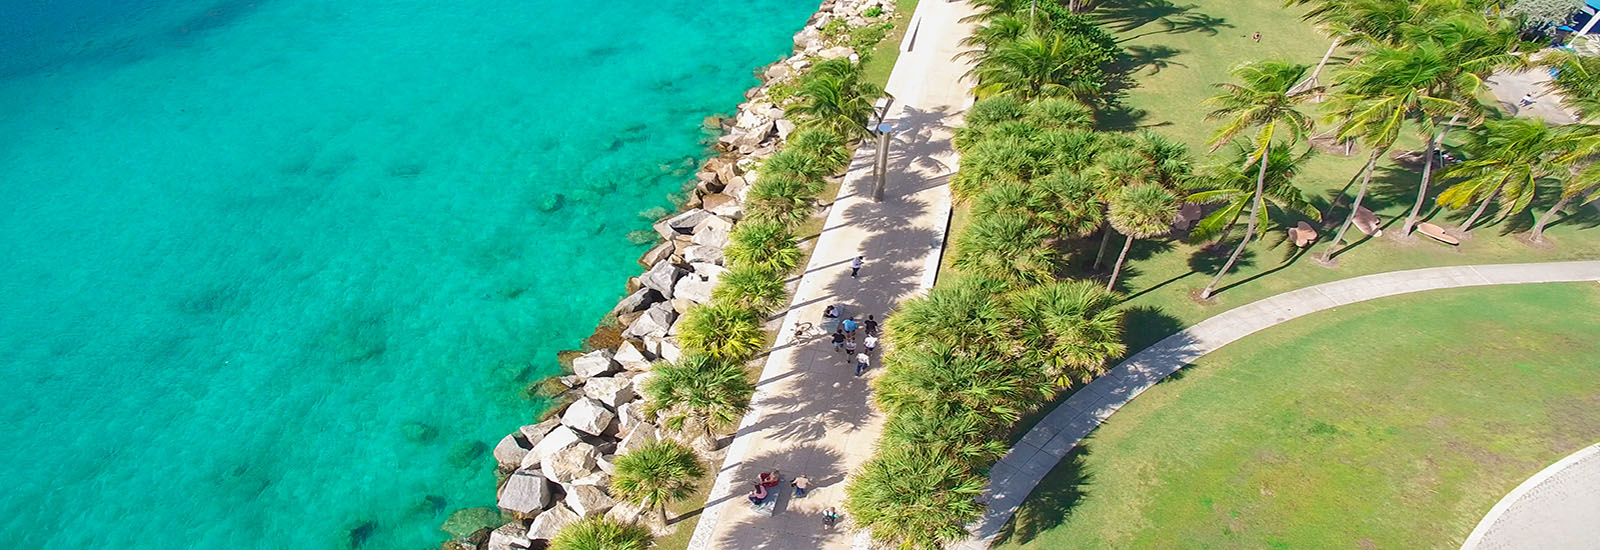 This is a stock photo. An aerial photo of South Pointe Park in Miami, Florida.